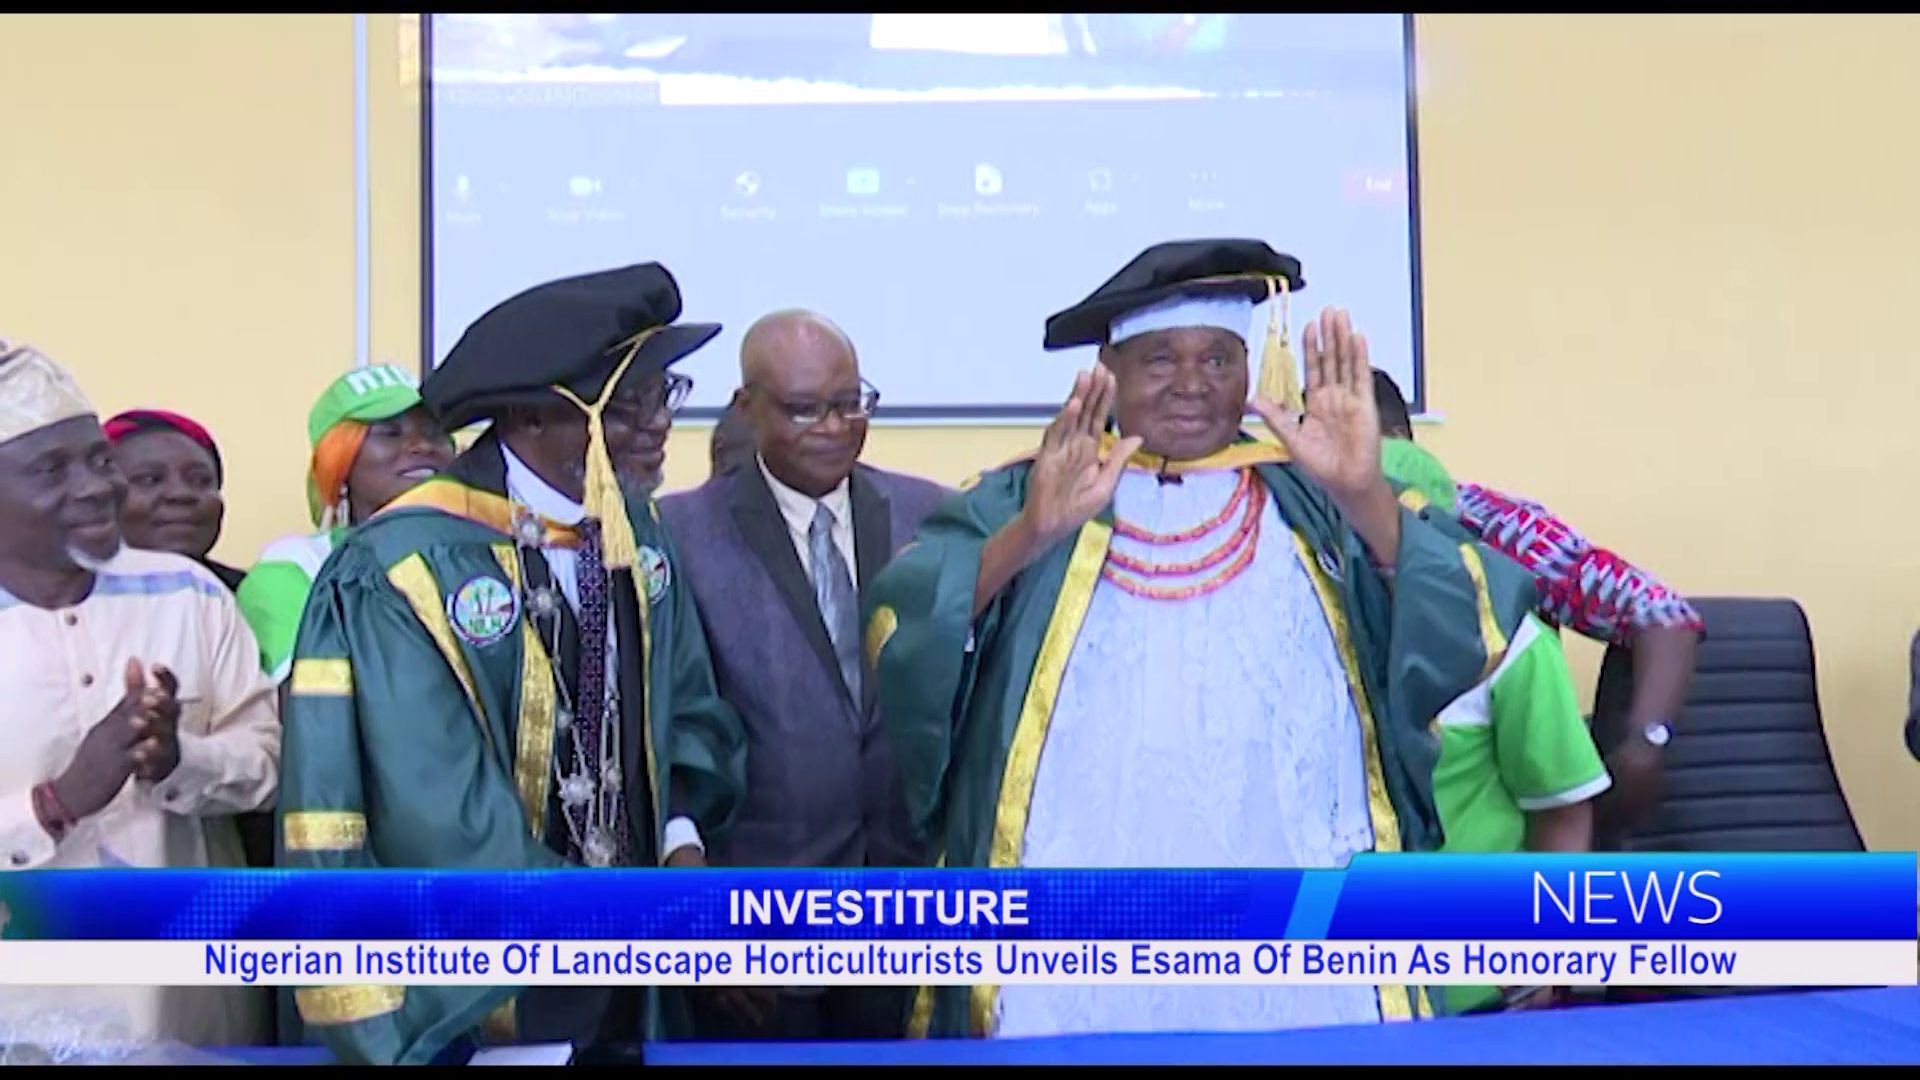 Nigerian Institute Of Landscape Horticulturists Unveils Esama Of Benin As Honorary Fellow